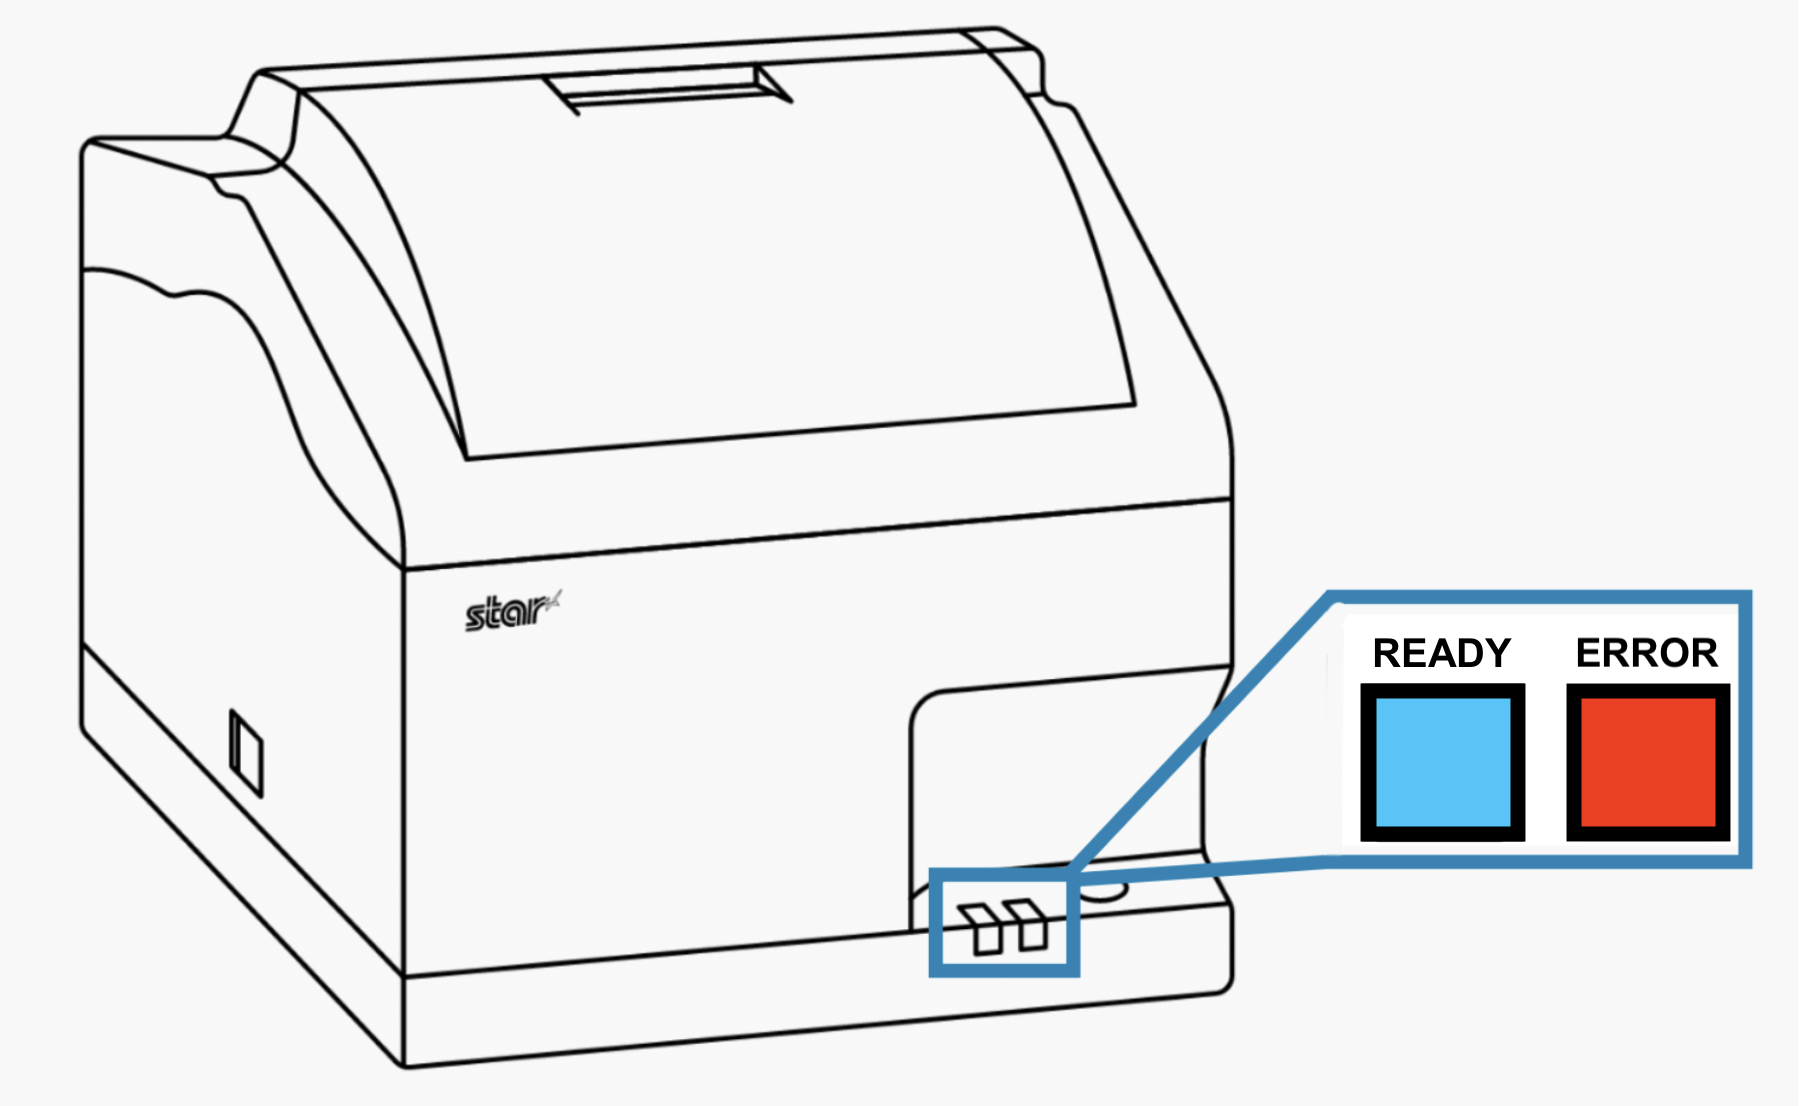 Printer indicating blue ready light and red error lights.